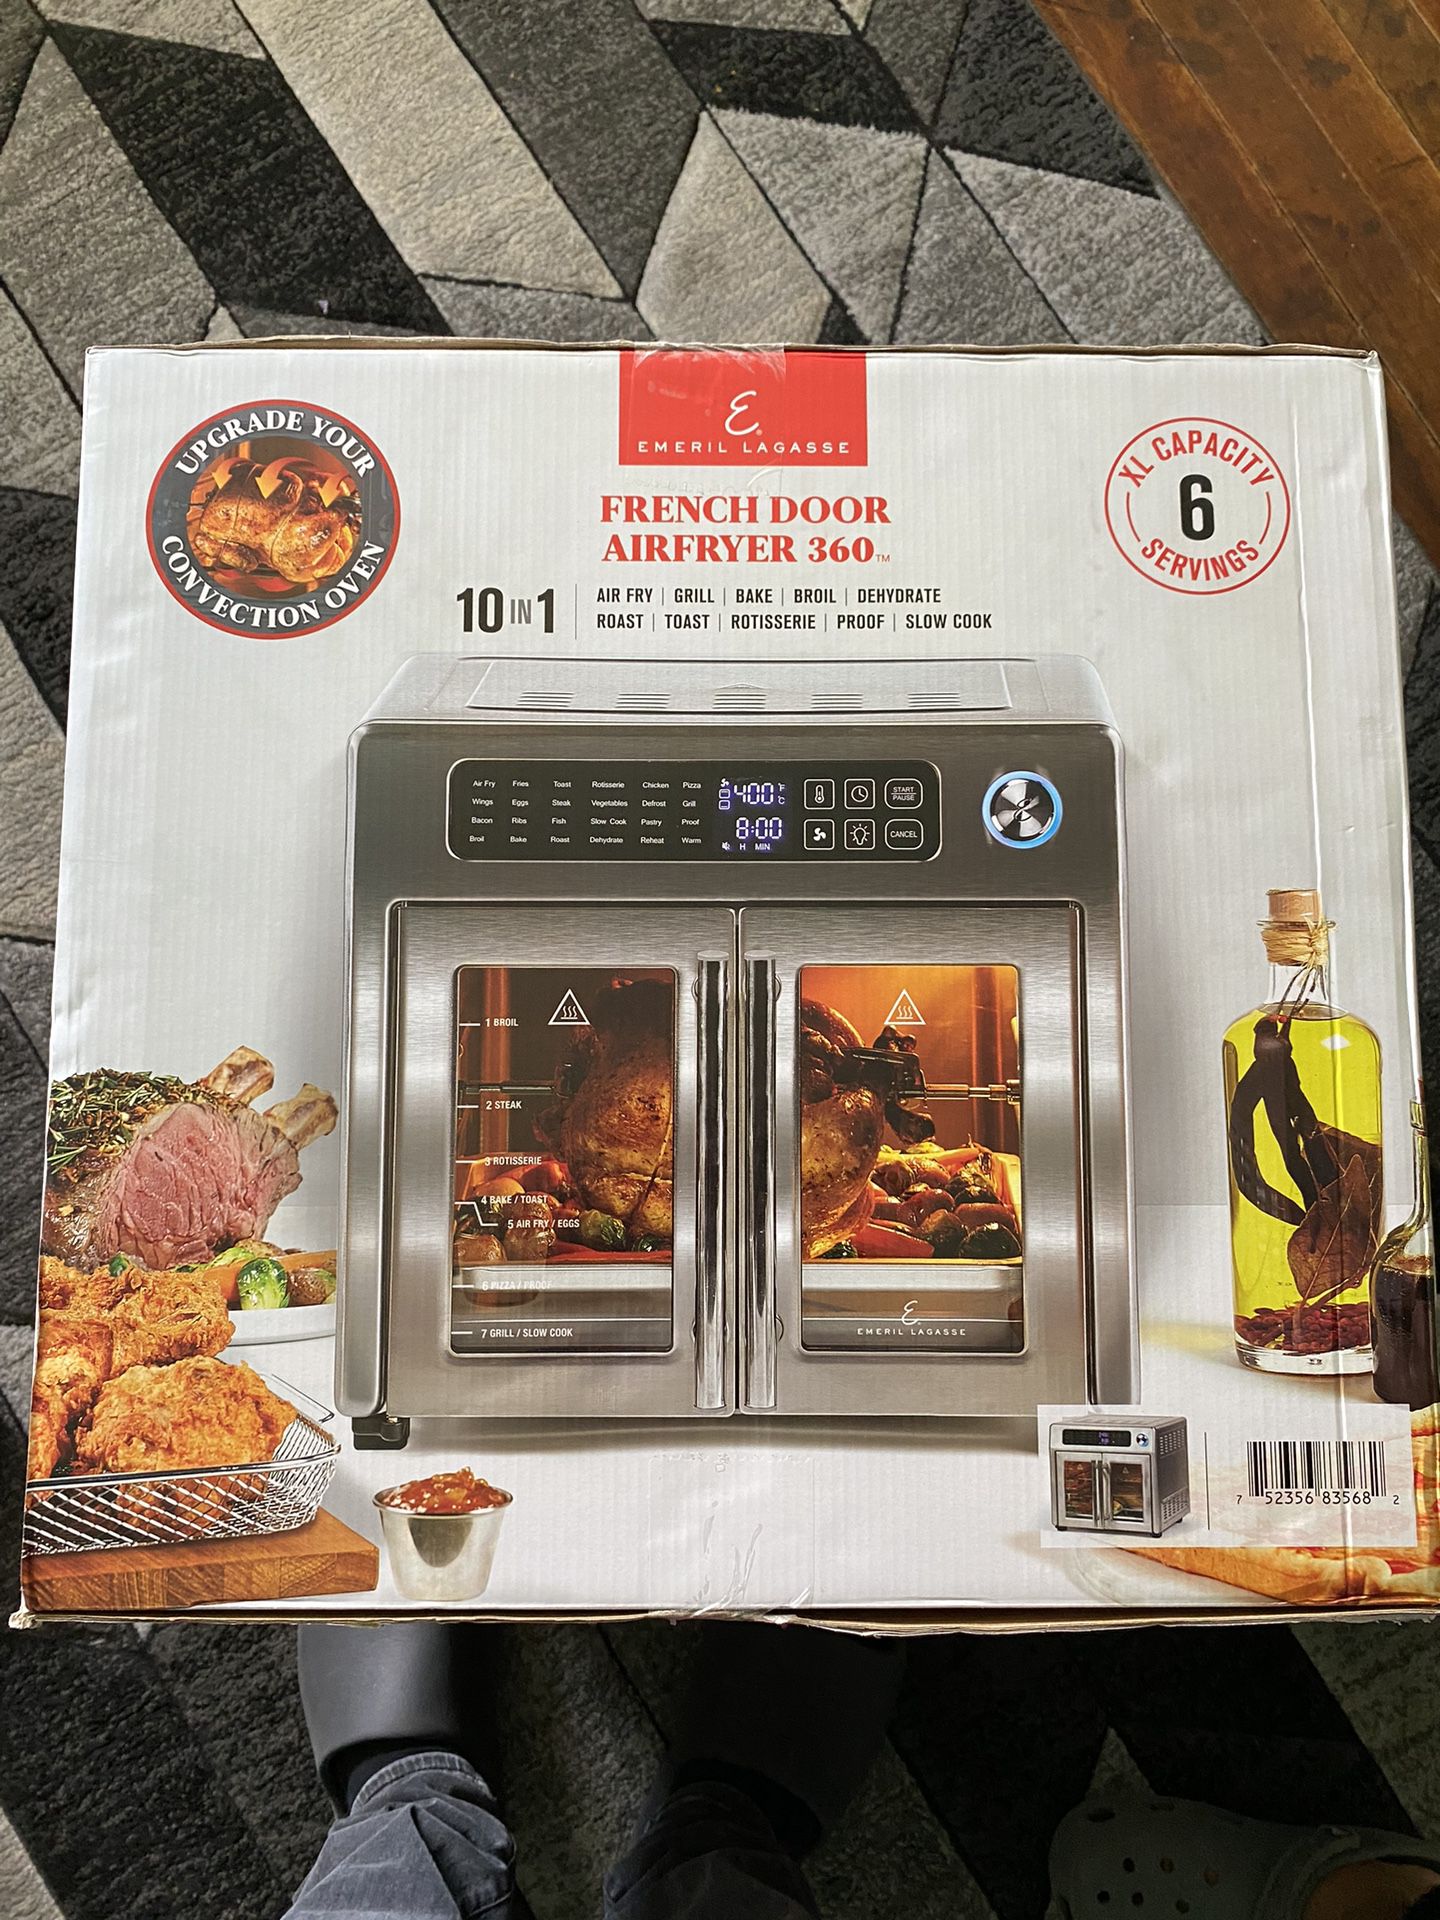 Emeril Lagasse 12-in-1 Dual Zone AirFryer Oven for Sale in Macomb, MI -  OfferUp